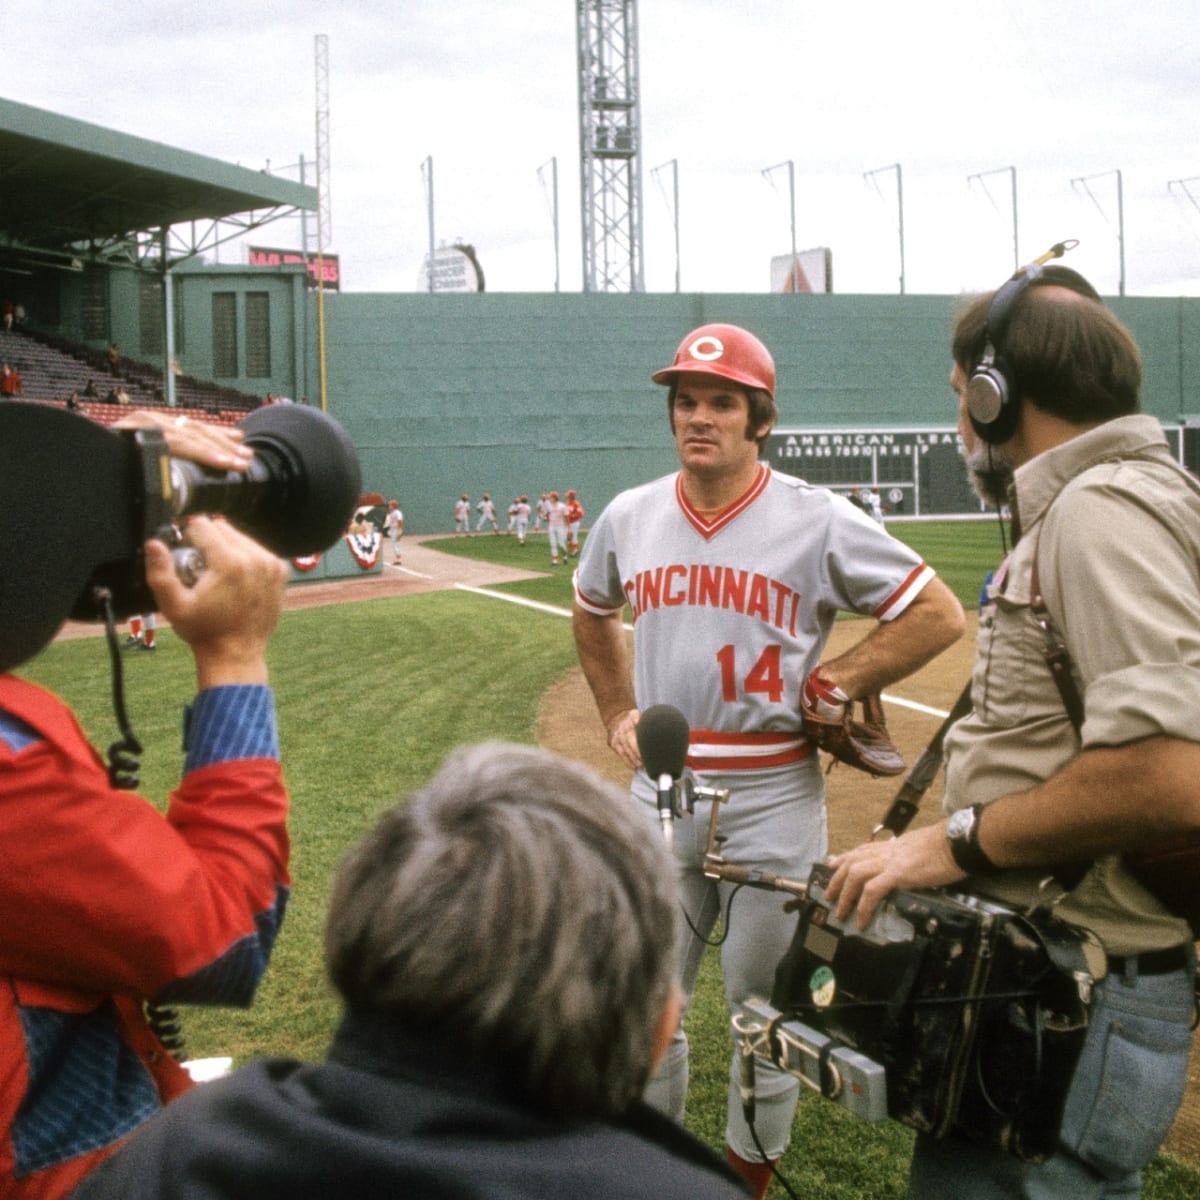 Disgraced baseball star Pete Rose is getting a reality show – SheKnows